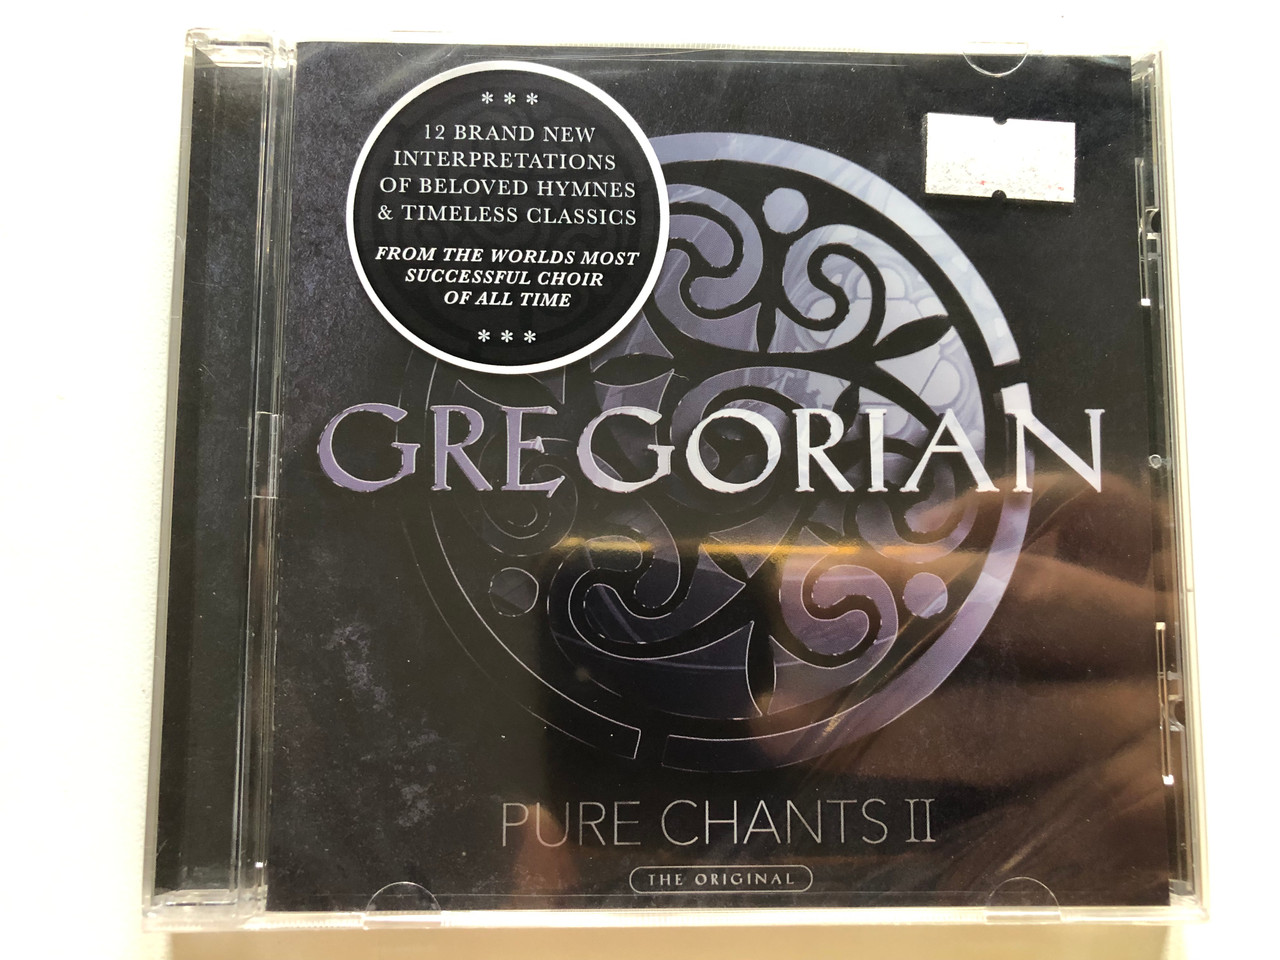 https://cdn10.bigcommerce.com/s-62bdpkt7pb/products/0/images/313963/Gregorian_Pure_Chants_II_The_Original_12_Brand_New_Interpretations_Of_Beloved_Hymnes_Timeless_Classics._From_The_Worlds_Most_Successful_Choir_Of_All_Time_Ear_Music_Audio_CD_2022_021_1__24650.1701197883.1280.1280.JPG?c=2